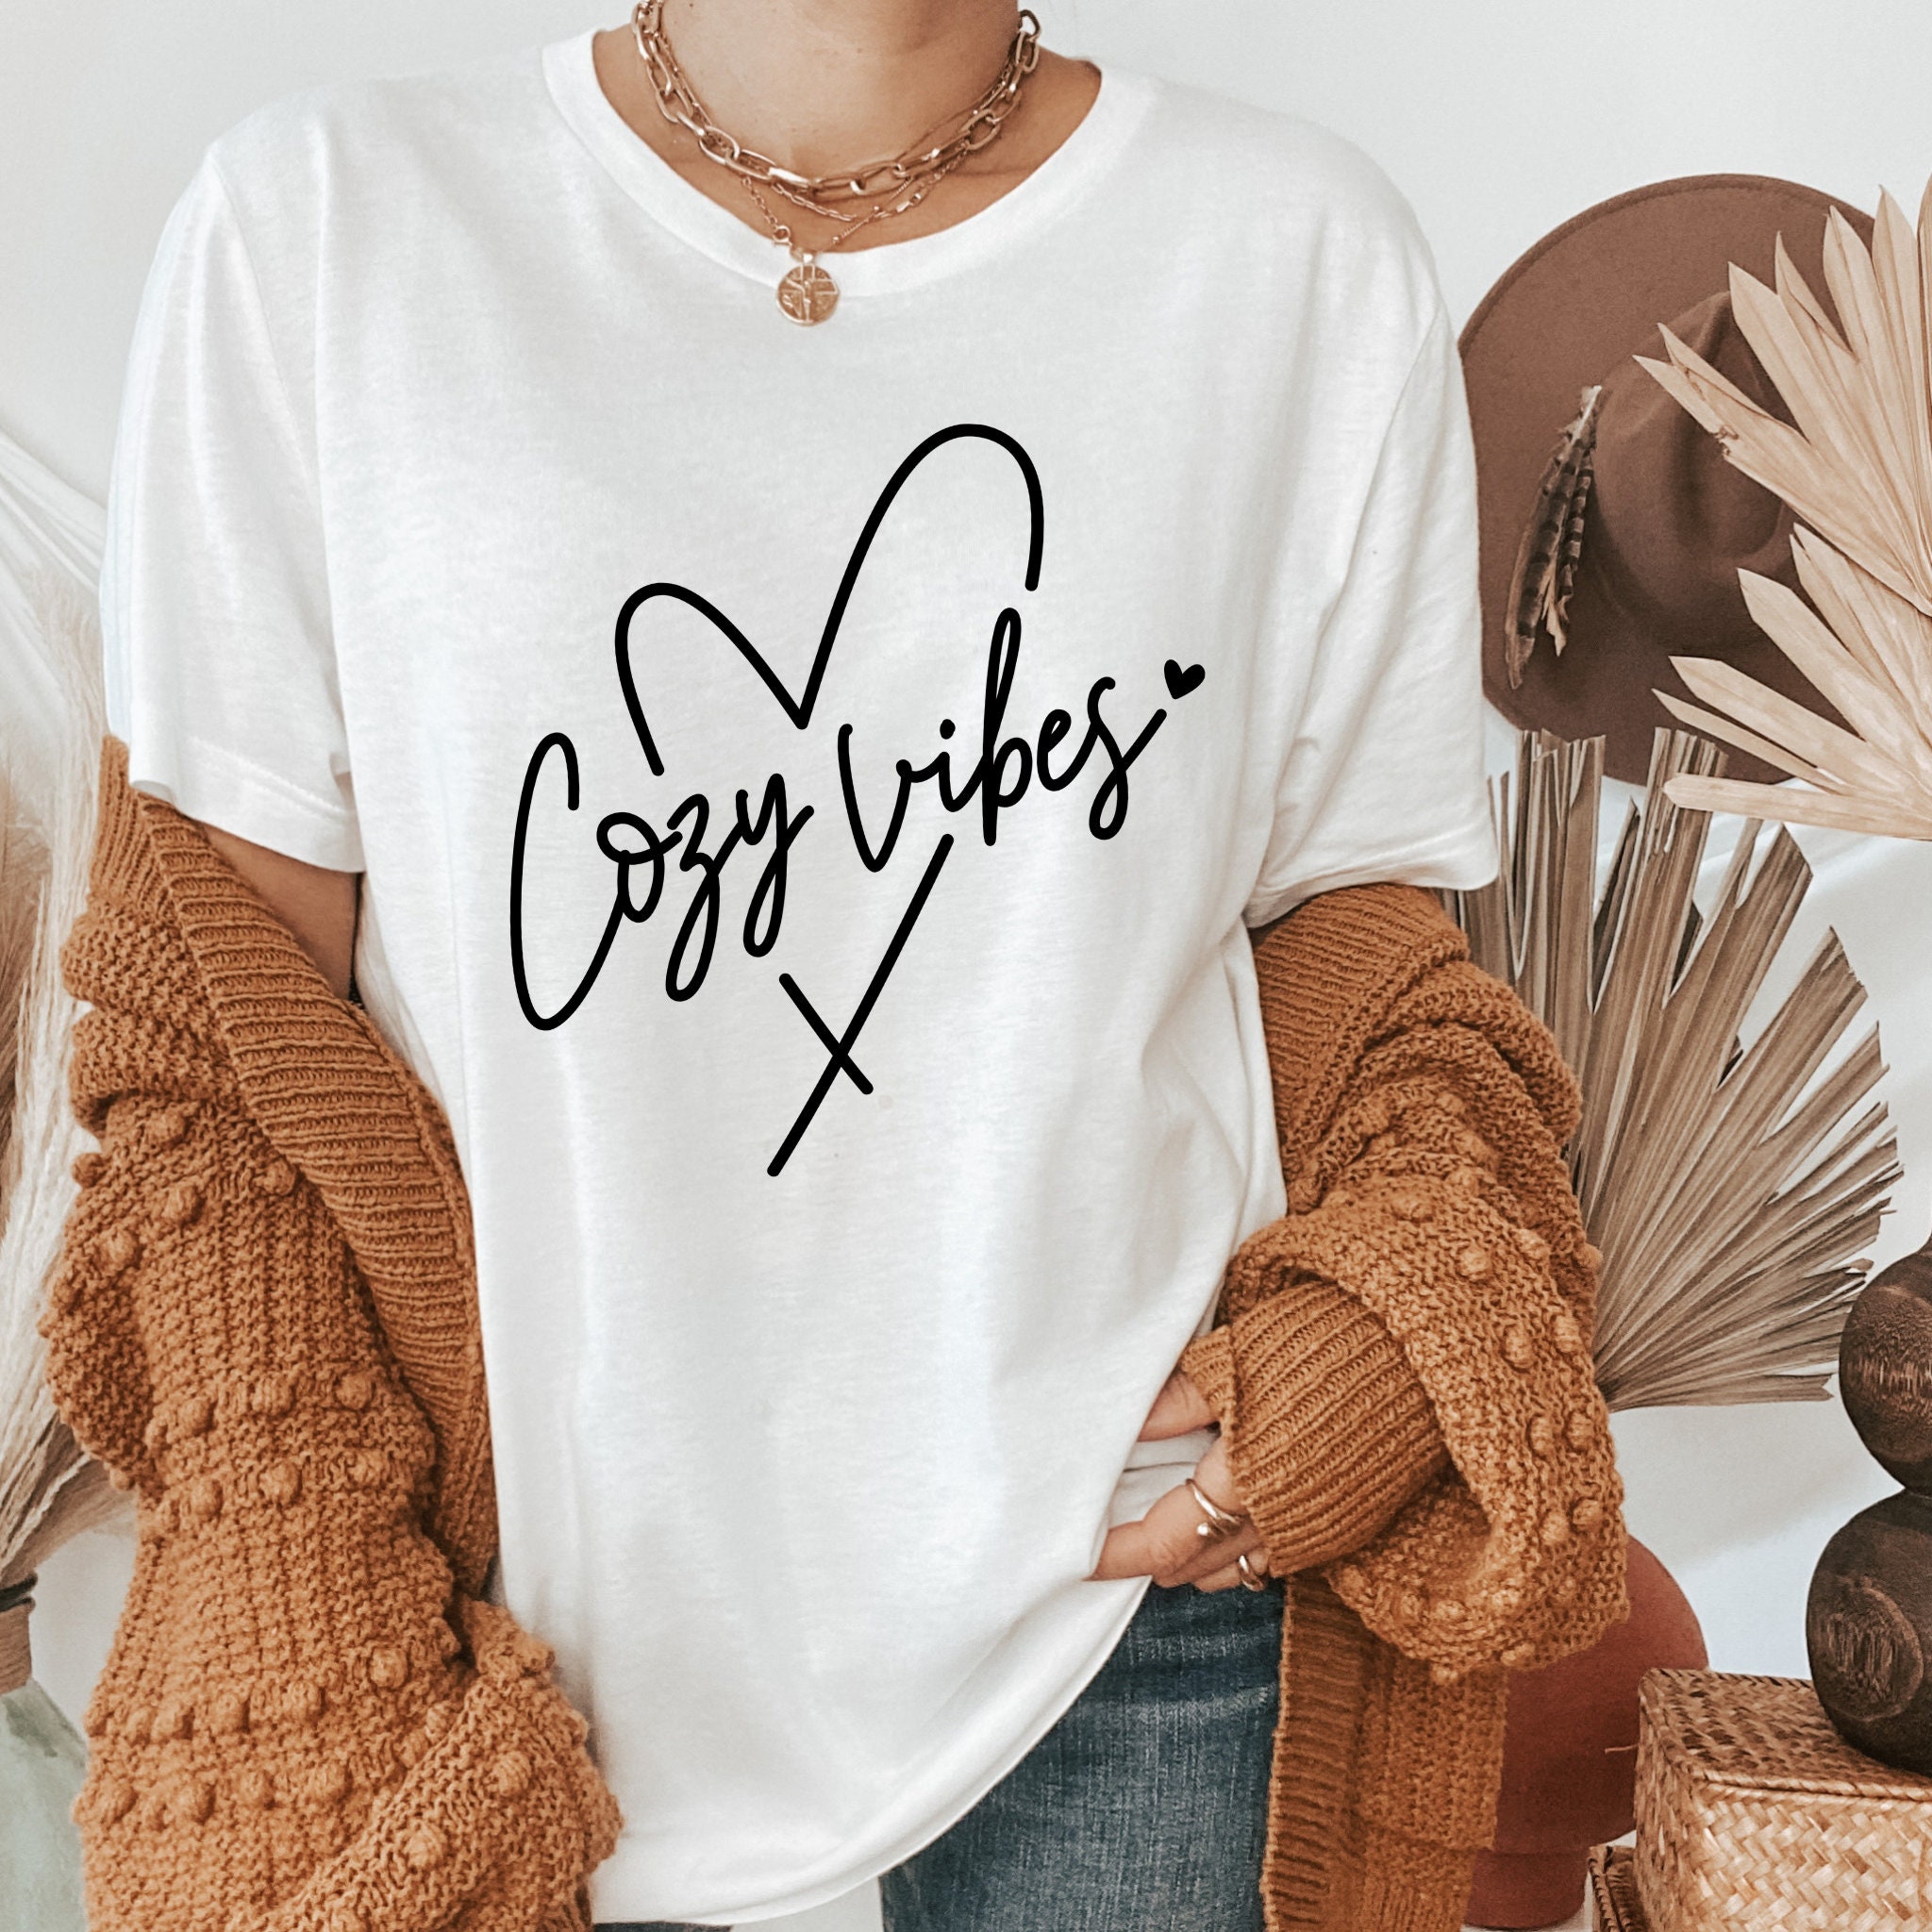 Comfy Cozy Shirt, Cozy Gifts for Women, Soft Tshirts for Women